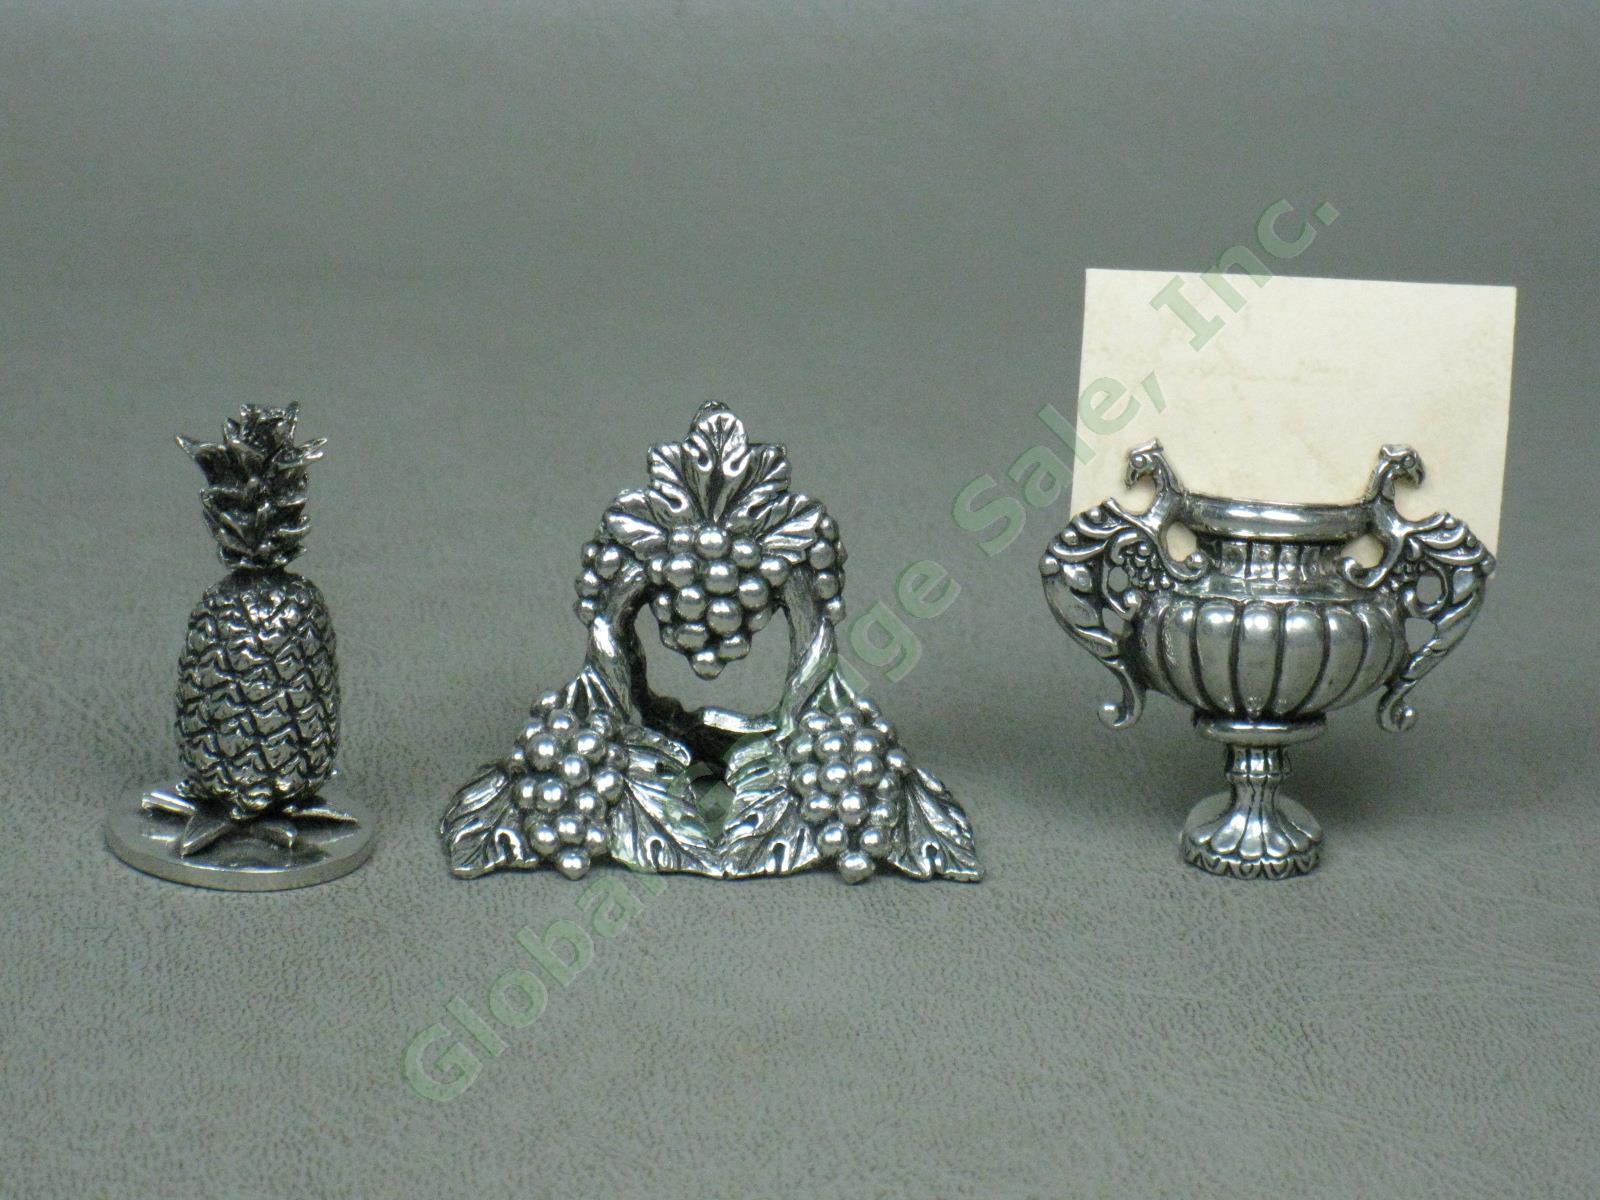 143 NEW Pewter Placecard Name Card Holder Lot Cherub Butterfly Shell Pineapple + 2